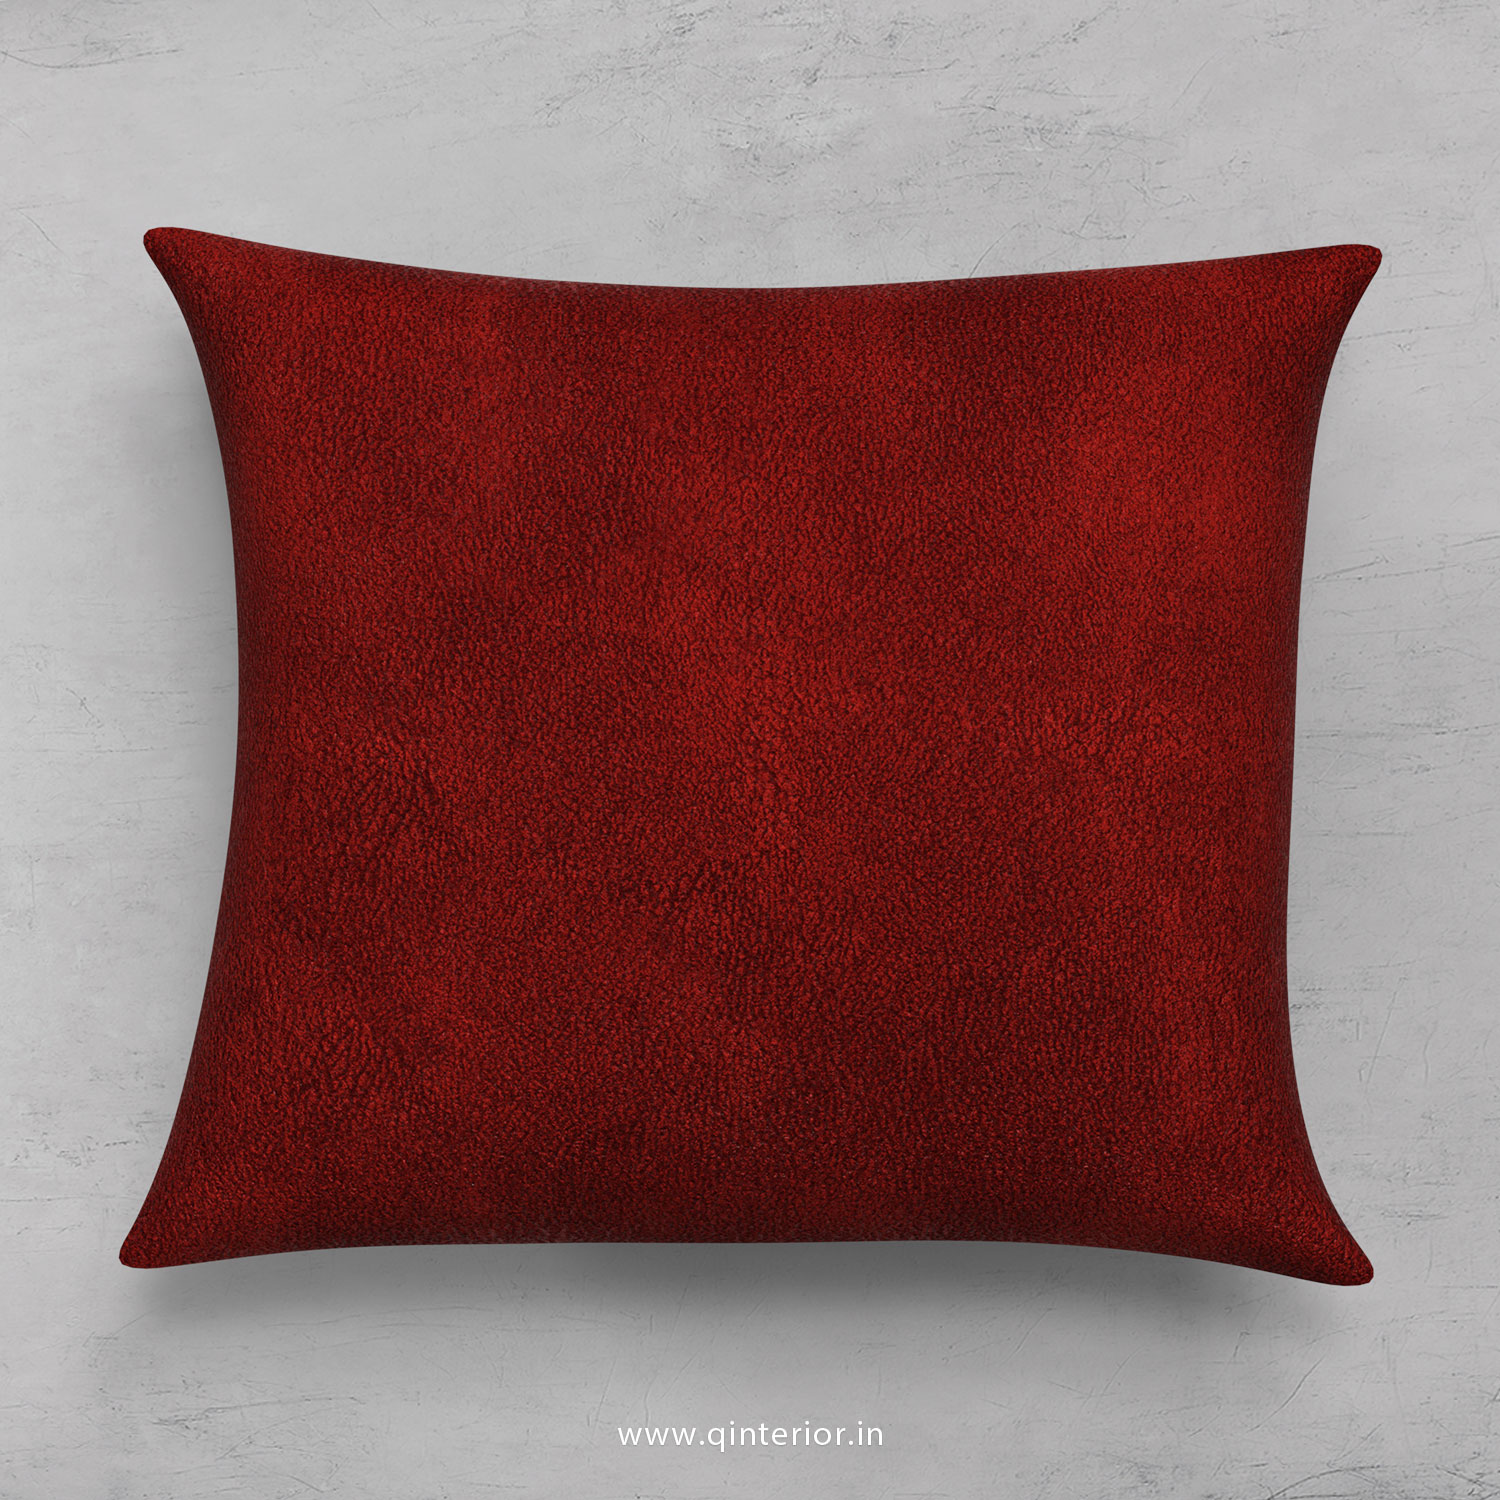 Cushion With Cushion Cover in Fab Leather - CUS001 FL08